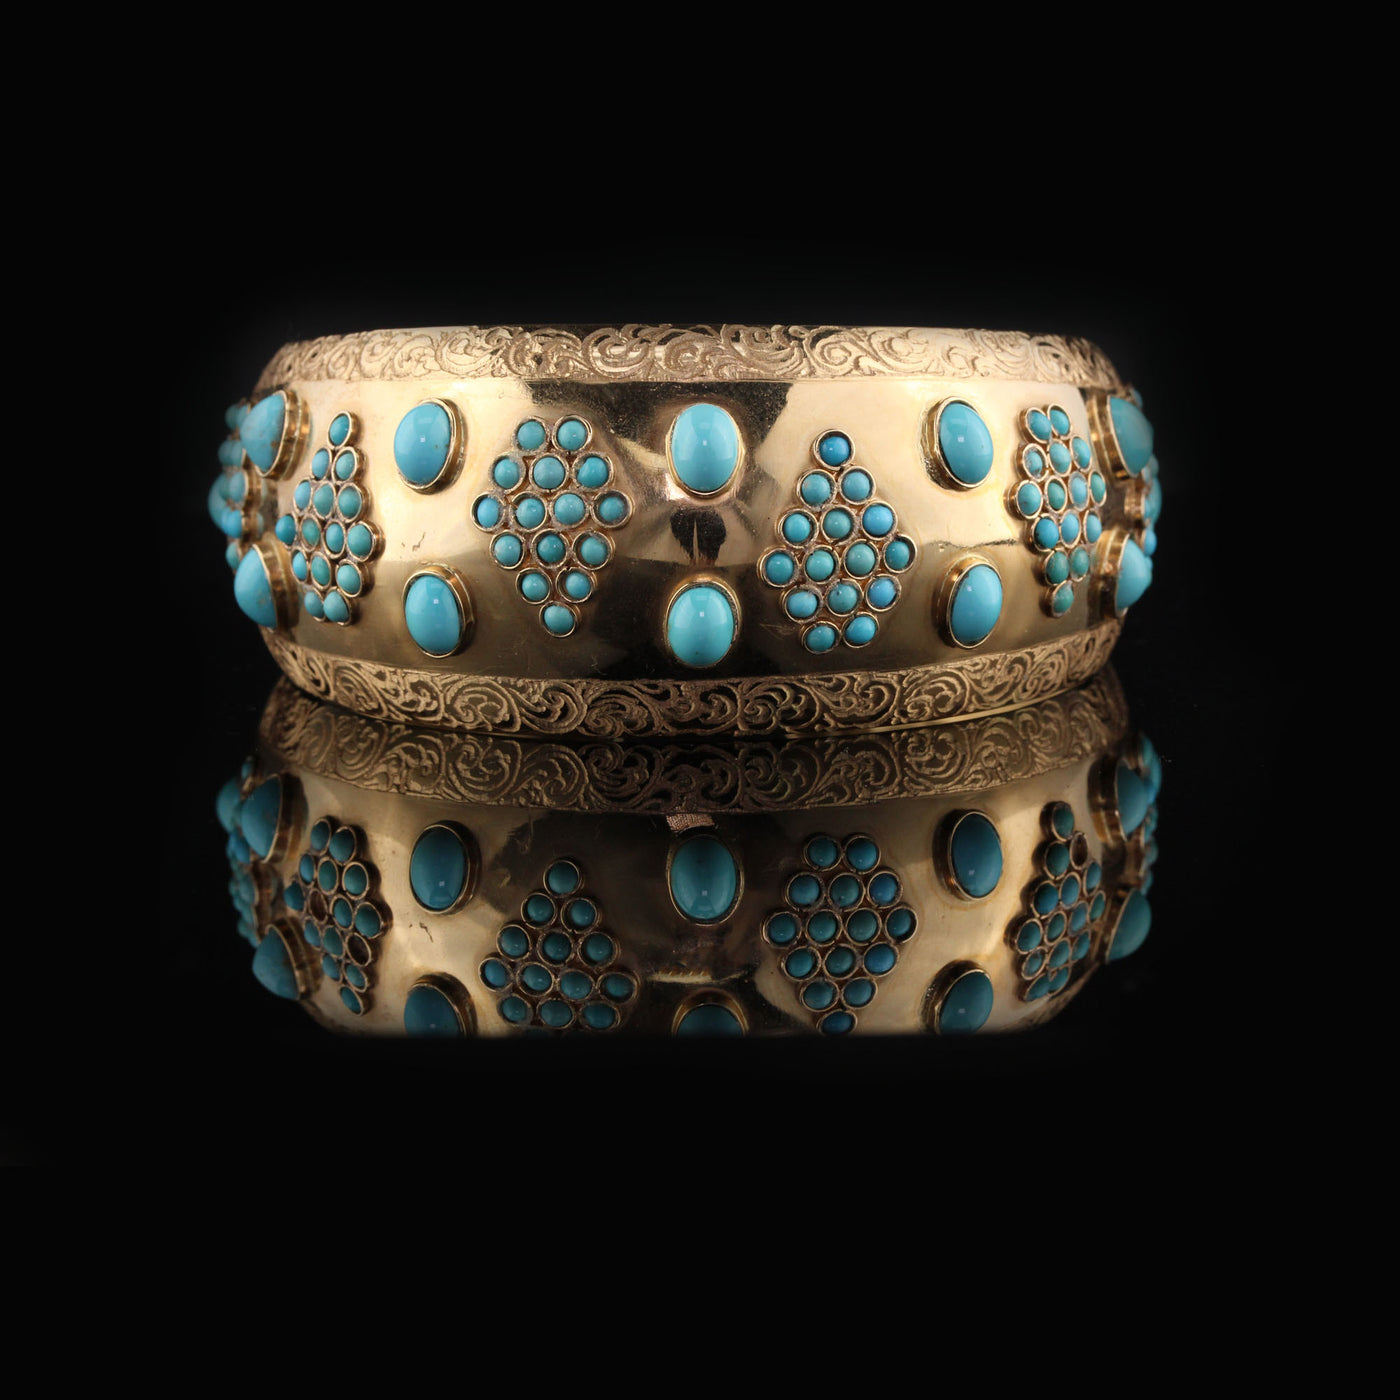 Antique 18K Yellow Gold & Turquoise Arm Cuff - The Antique Parlour